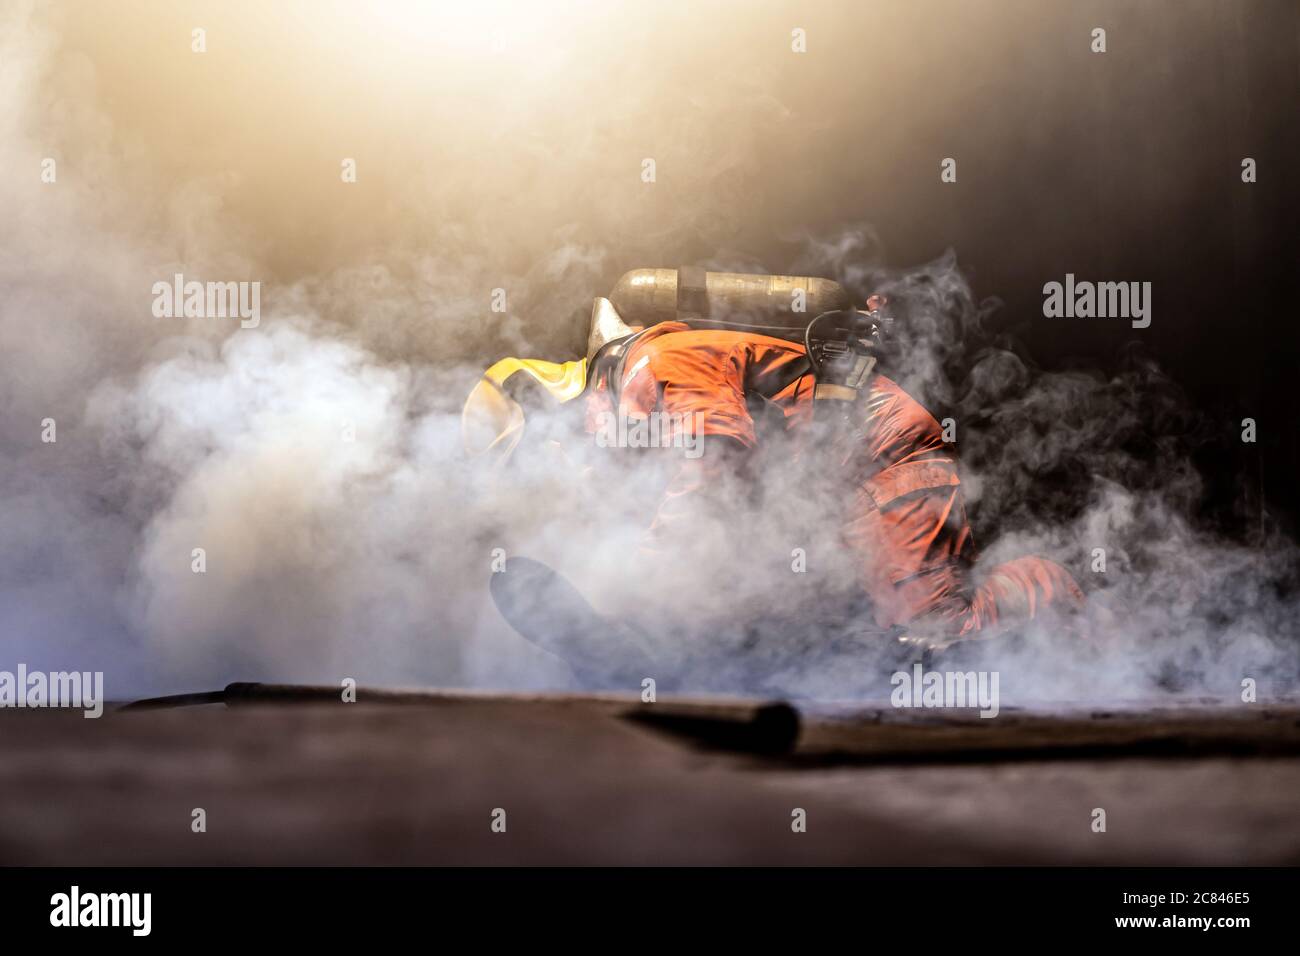 Firefighter check and rescue a man in building with smoke from fire inside. Firefighter safety rescue from accident and public service concept. Stock Photo